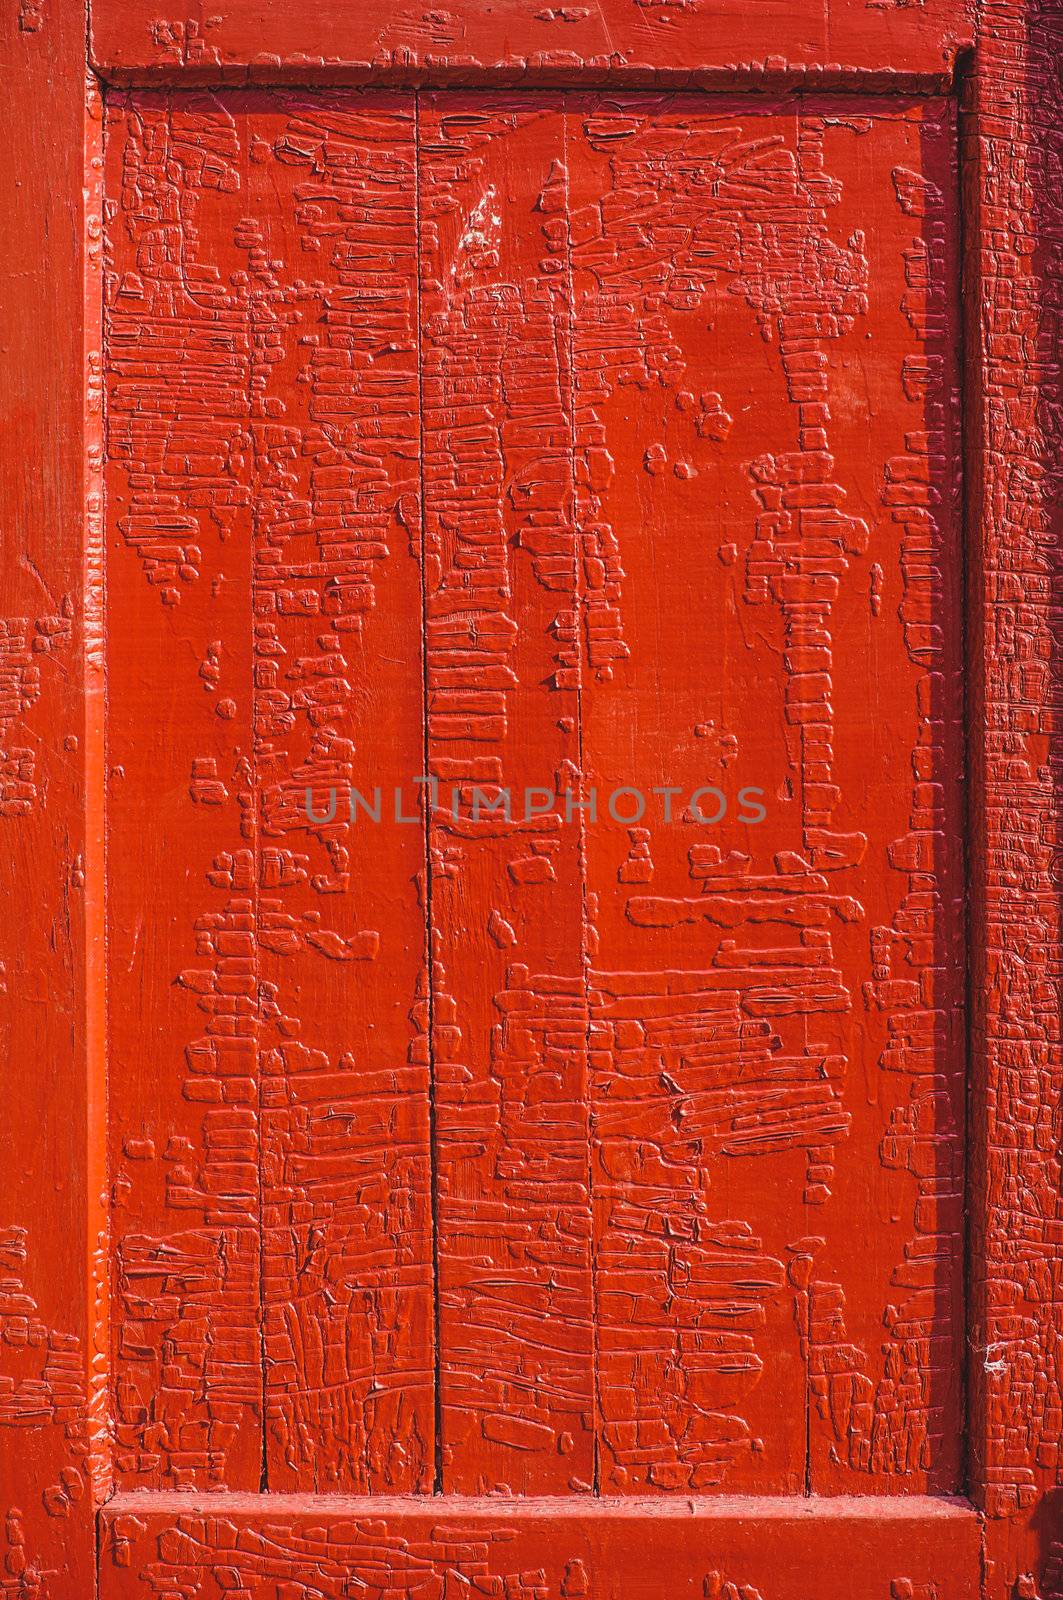 An old wood door panel with cracked red paint and grunge